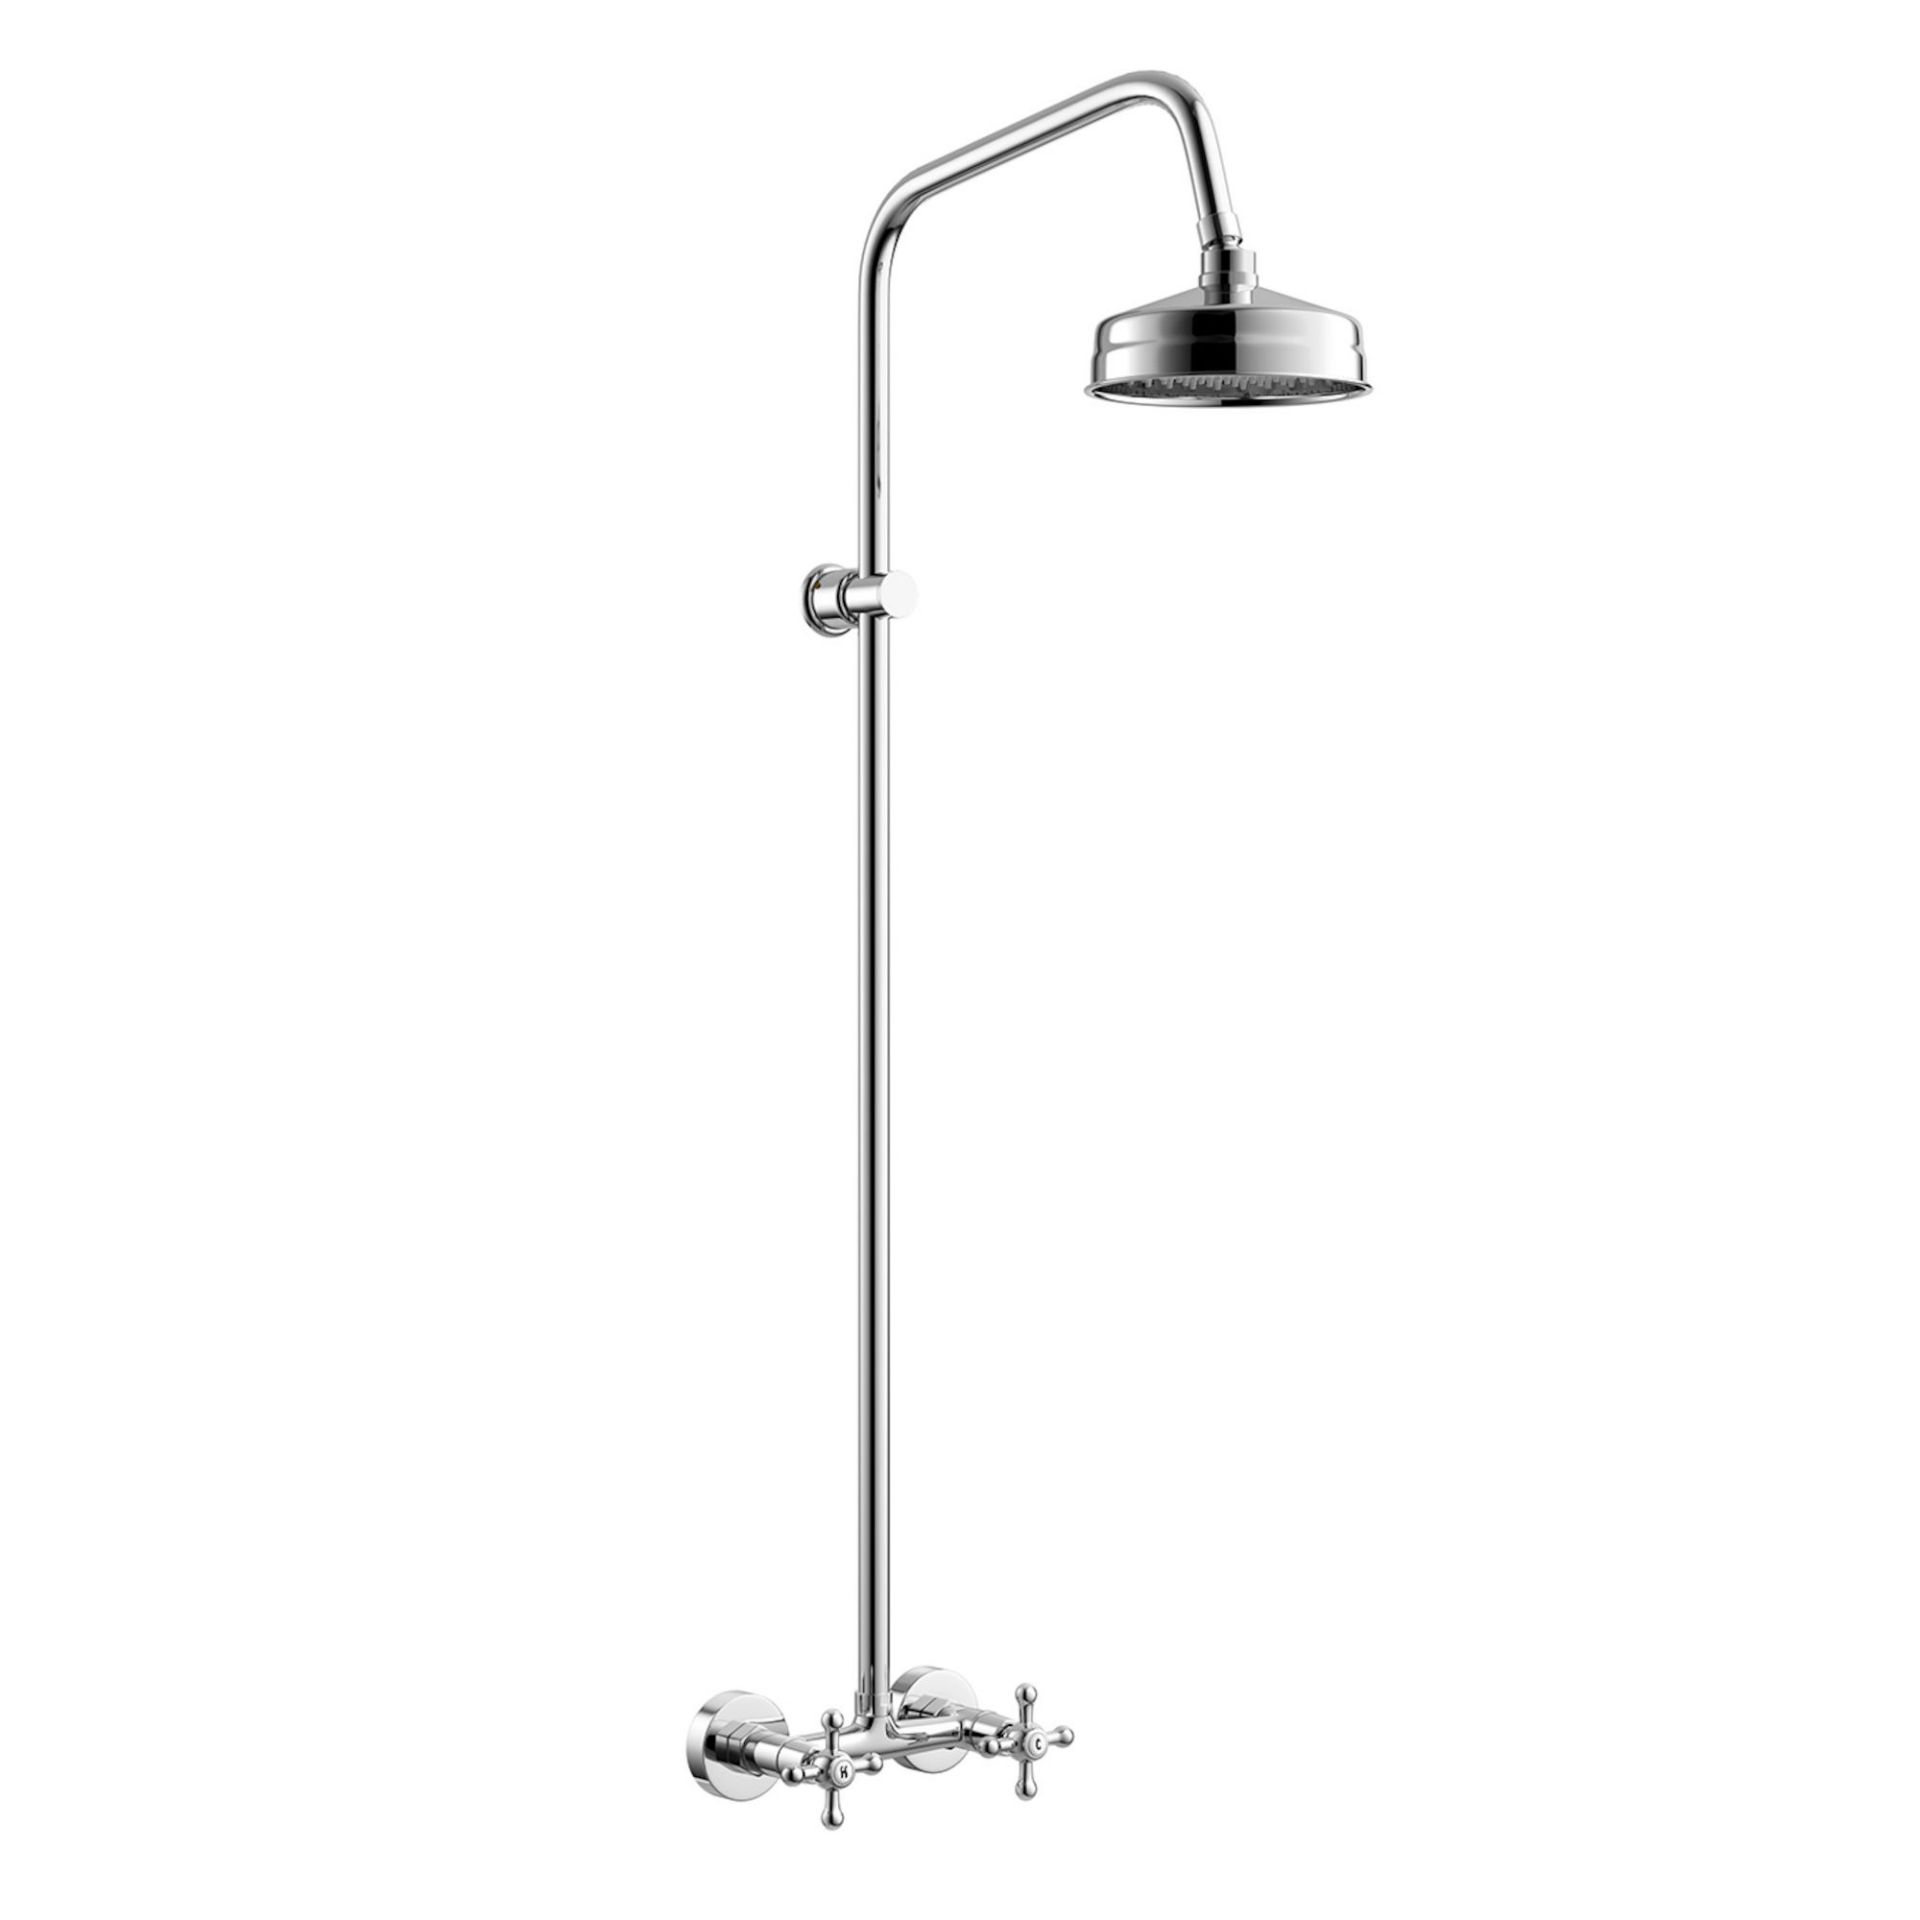 (ZL31) Traditional Exposed Shower & Medium Head. Exposed design makes for a statement piece Stunning - Image 2 of 3